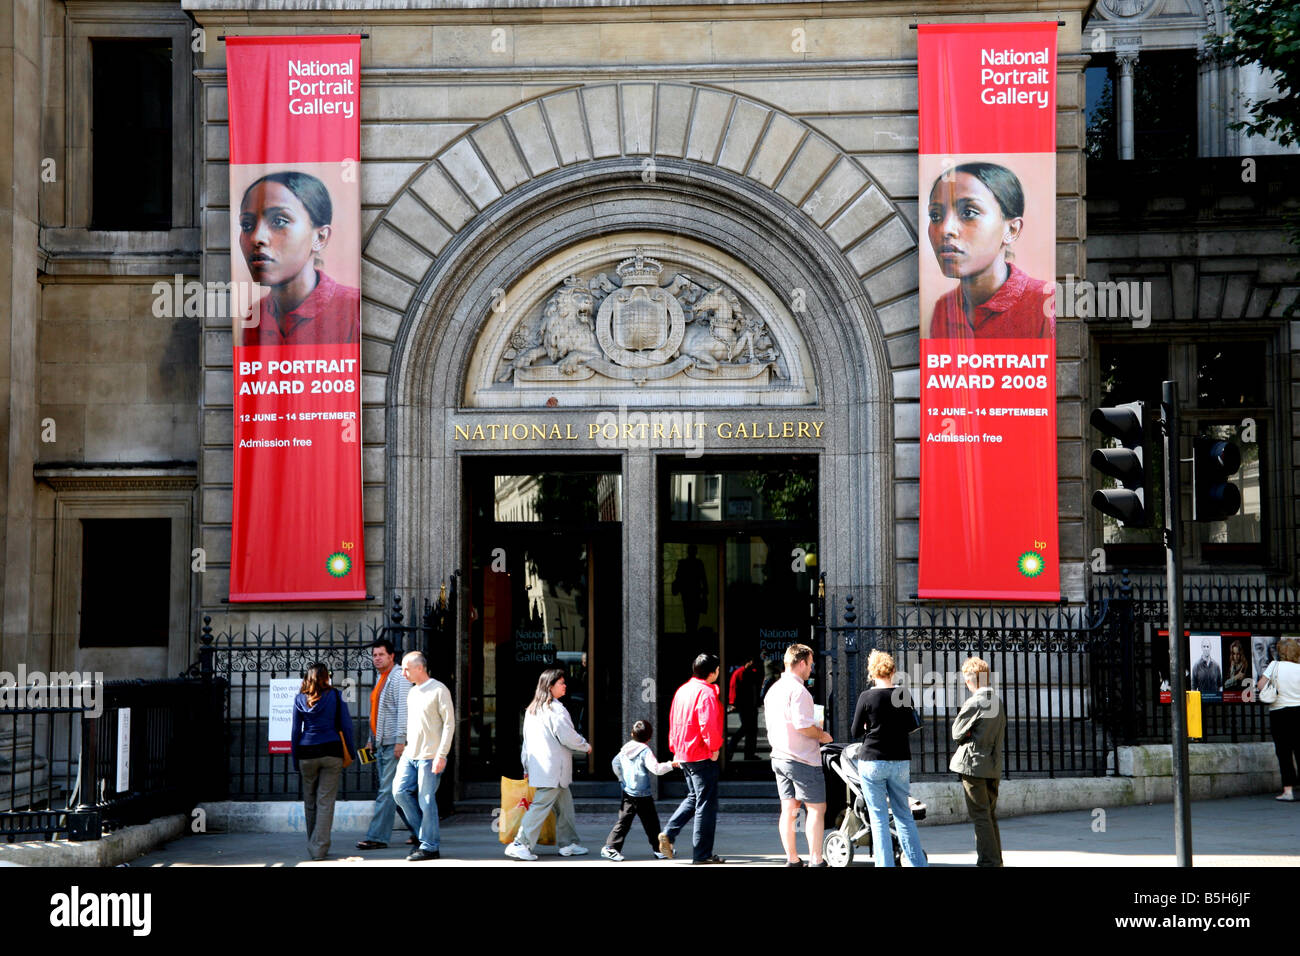 Entrance to National Portrait Gallery London Stock Photo